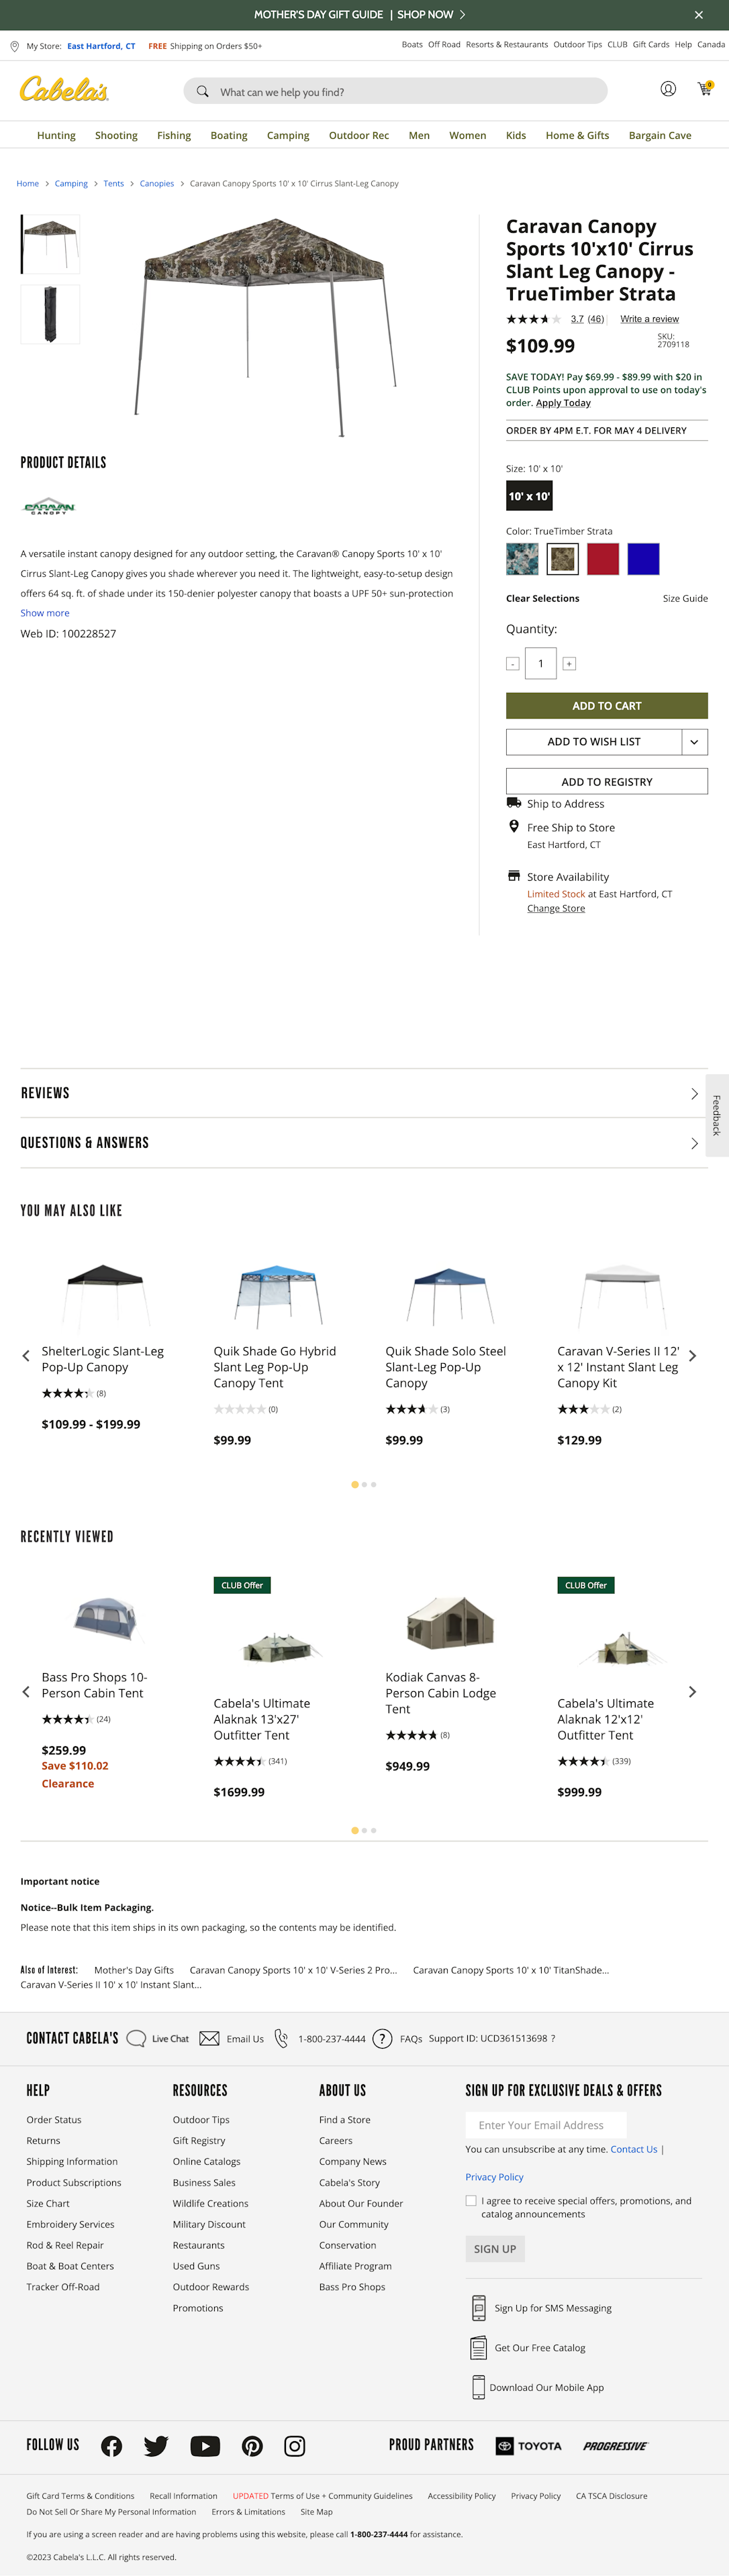 Louis Vuitton's Product Page – 530 of 1077 Product Page Examples